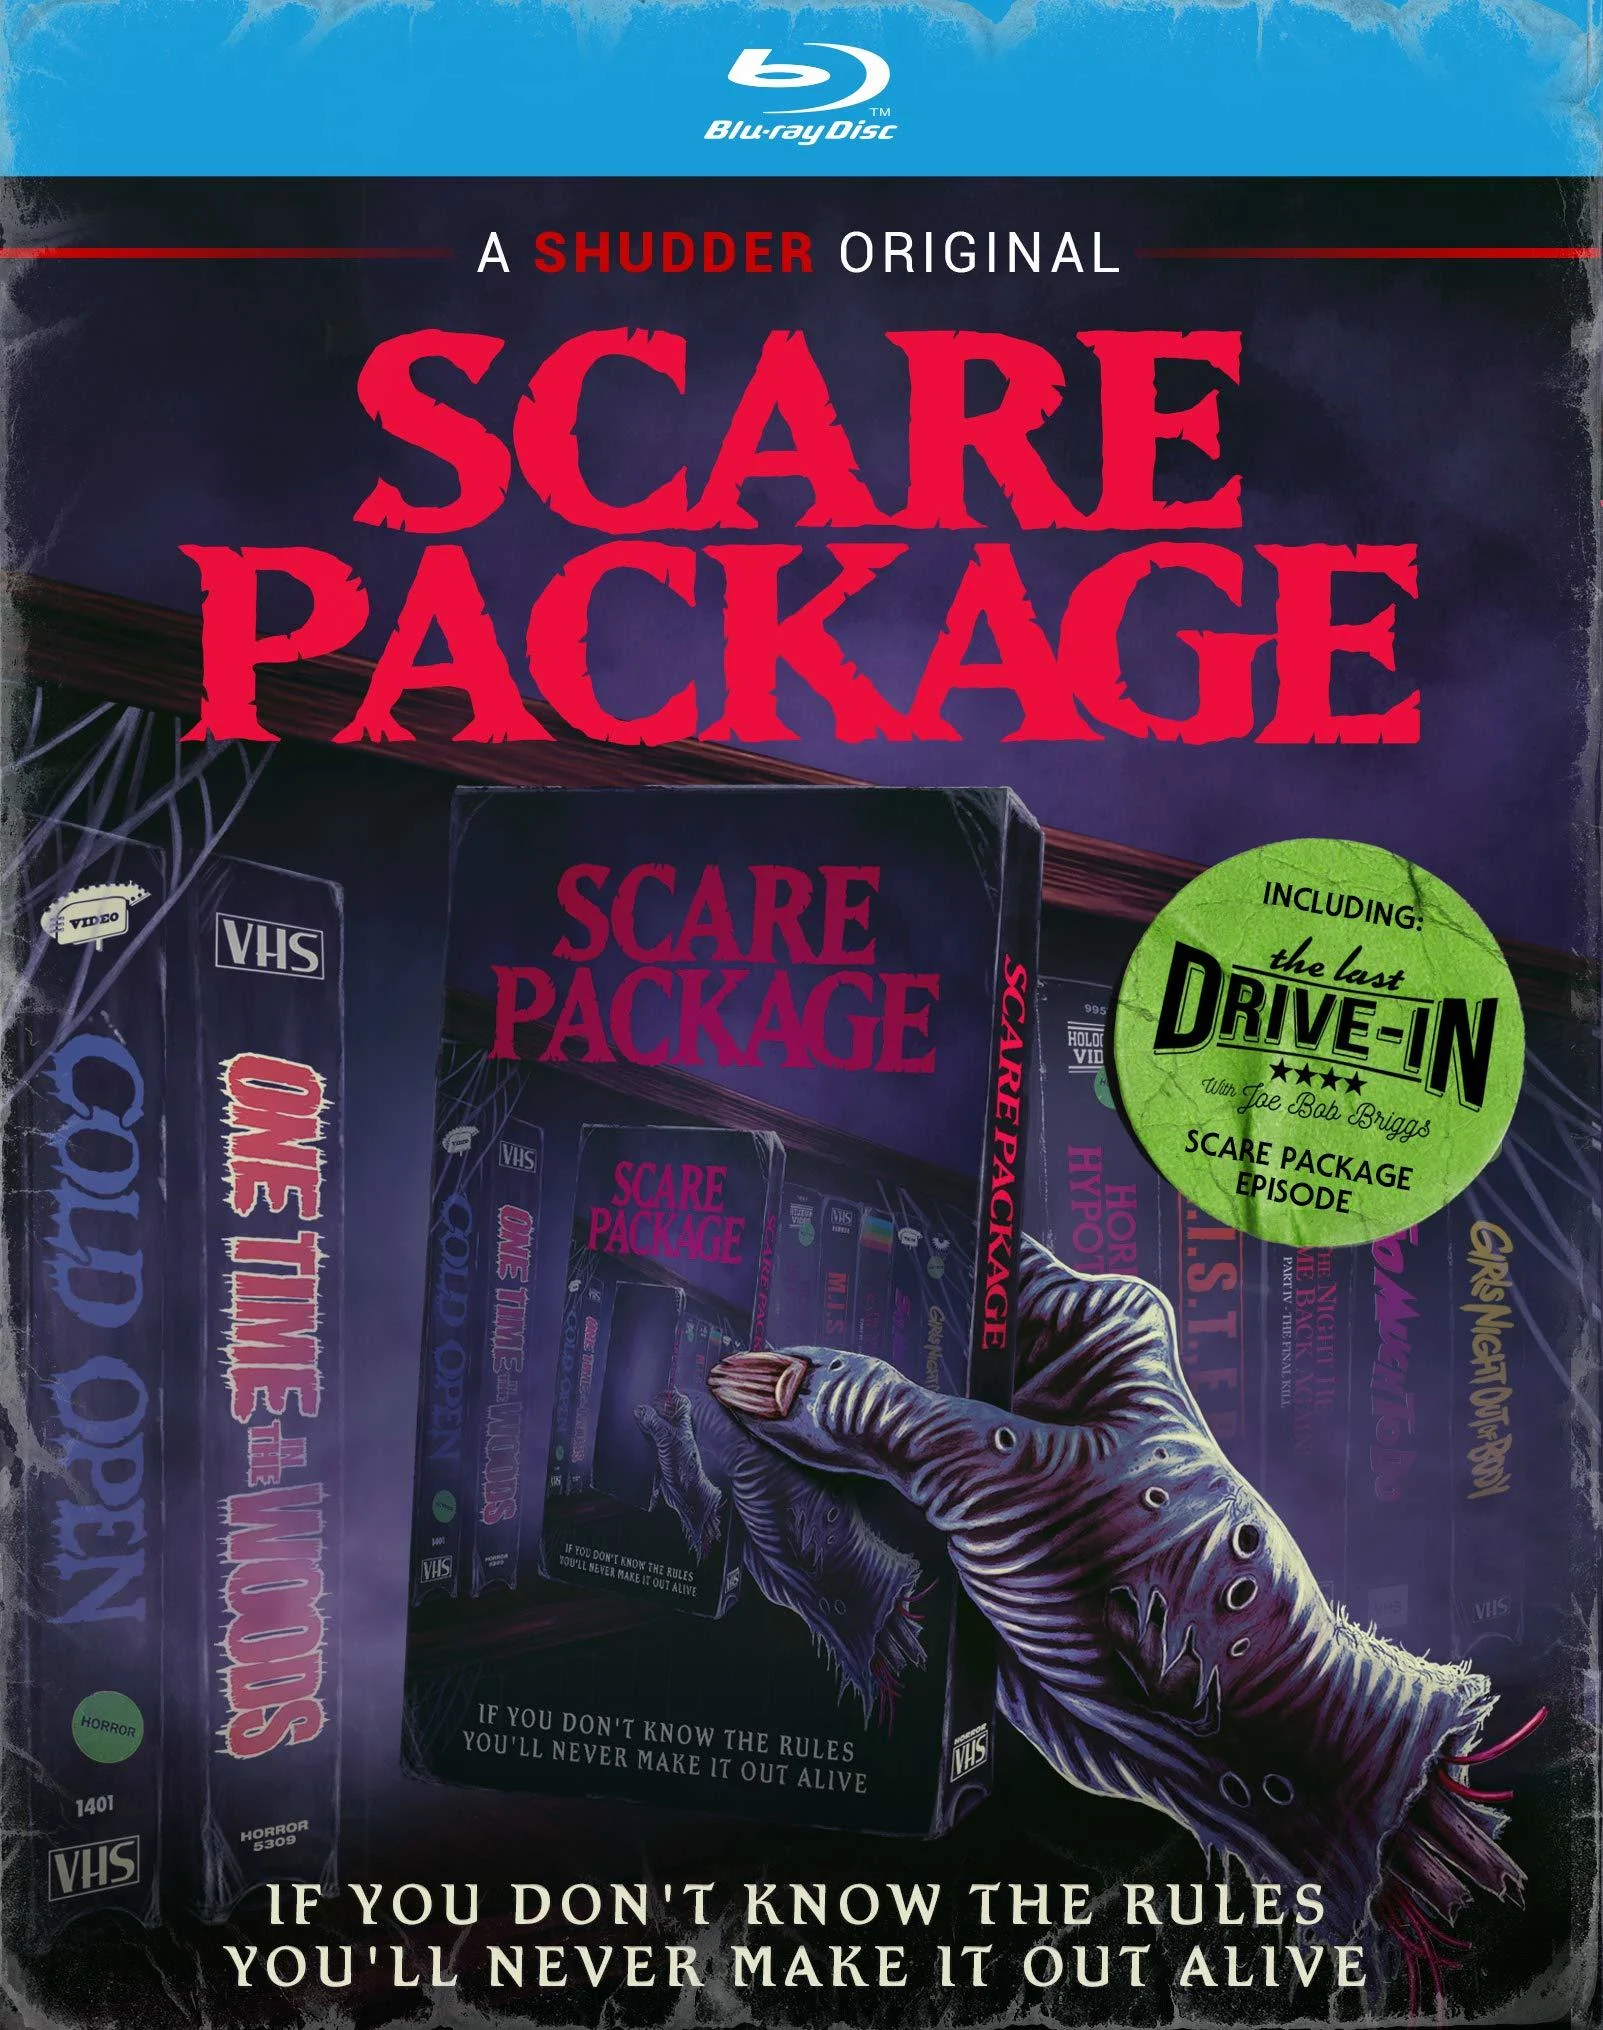 Scare Package (Blu-ray) on MovieShack